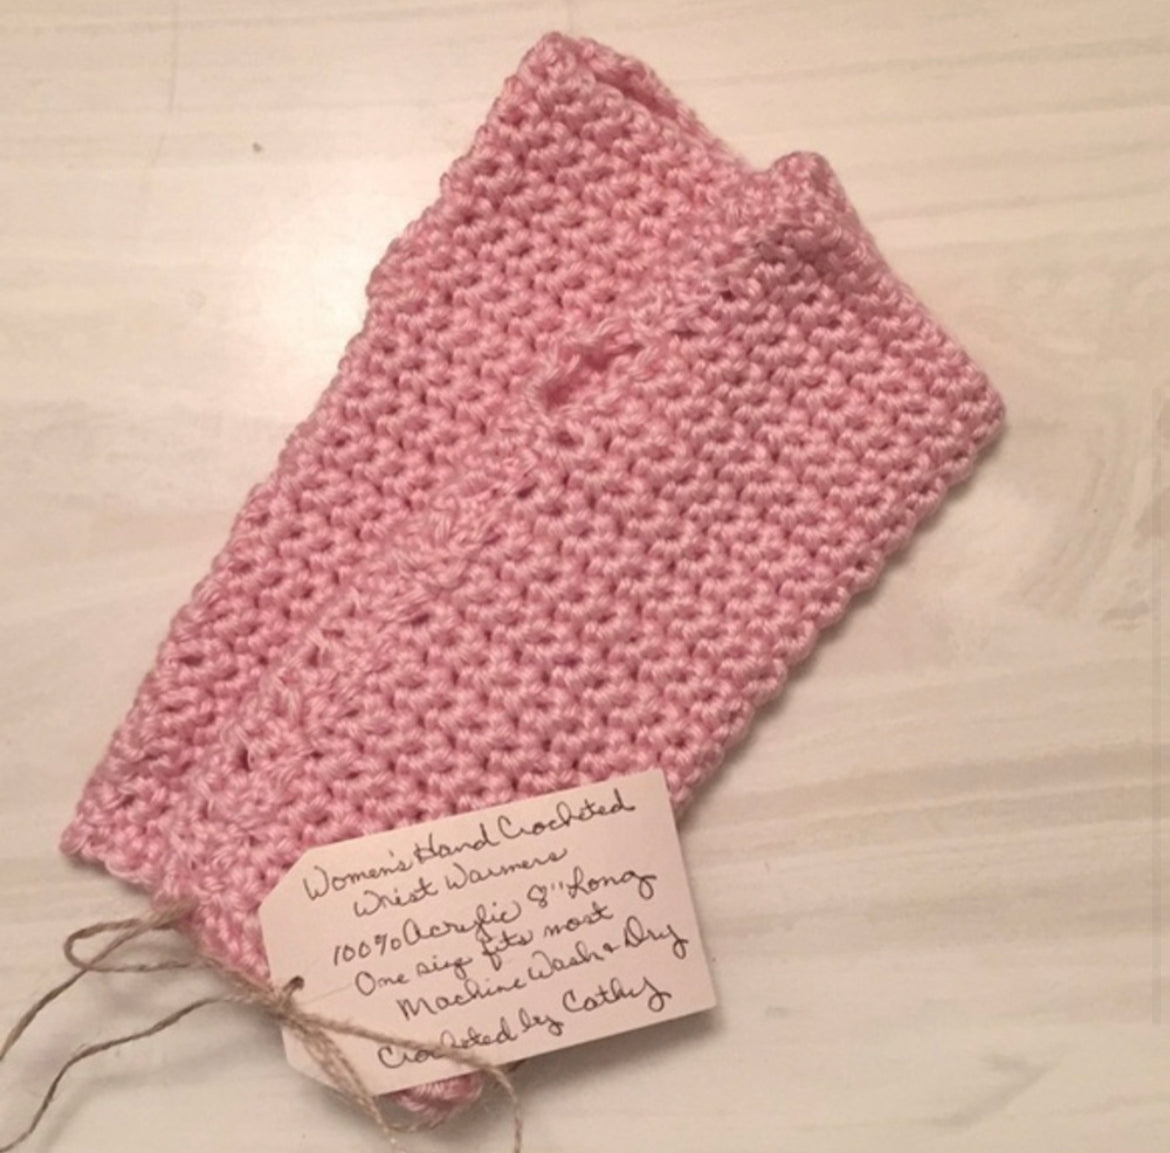 Extra Soft Pastel Baby Pink Writing Tech Fingerless Gloves Crochet Knit Gaming Texting Wrist Warmers